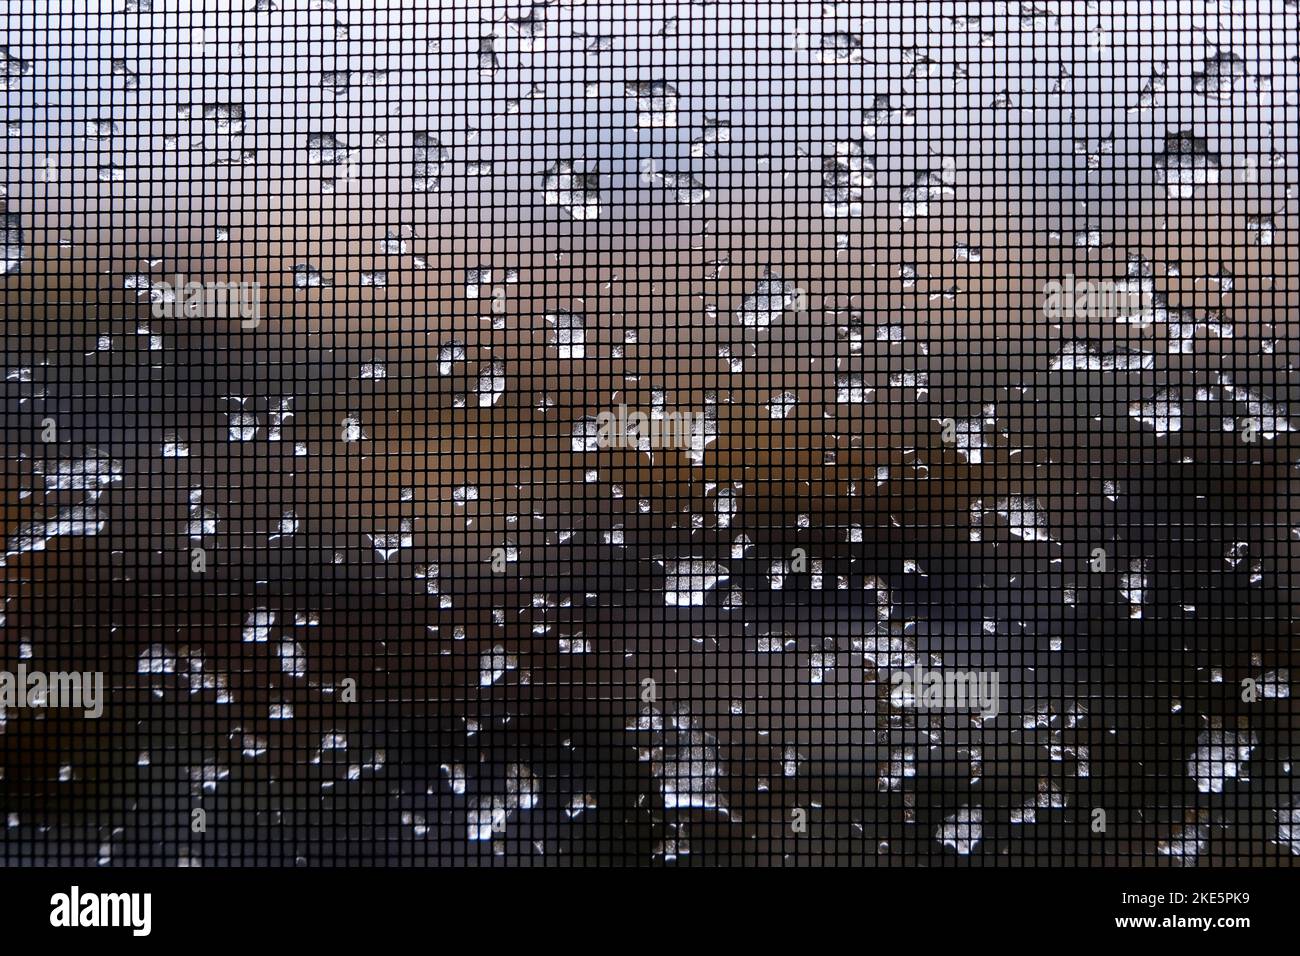 Ice frozen water on window screen mesh squares Stock Photo